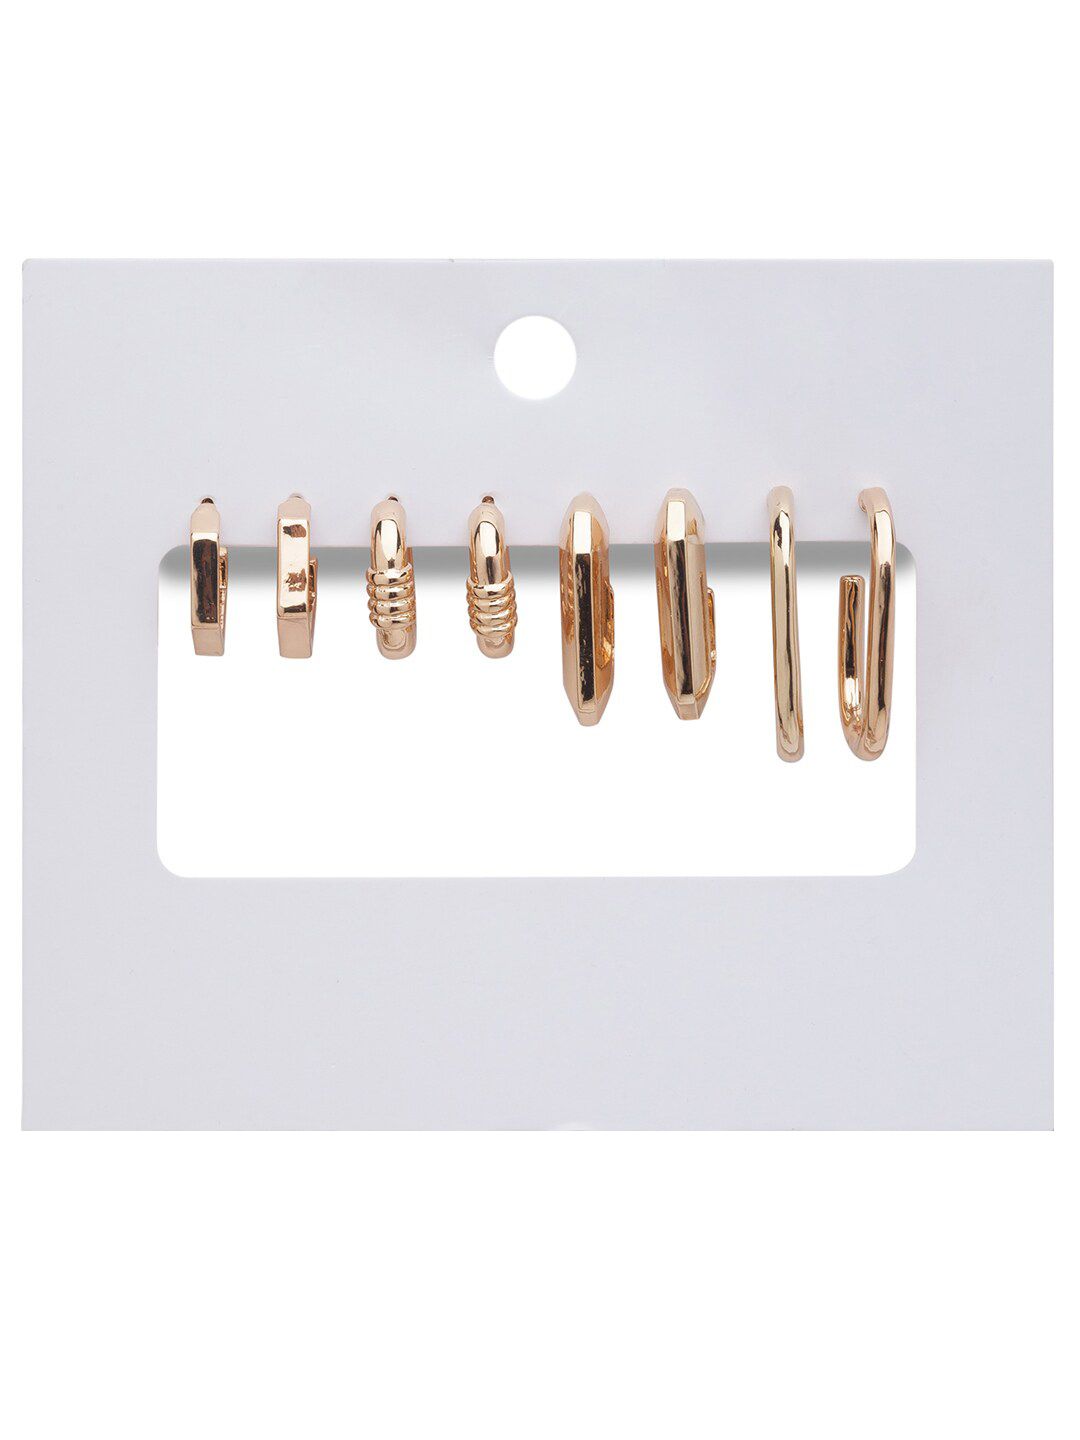 Lilly & sparkle Set of 4 Gold-Toned Contemporary Studs Earrings Price in India